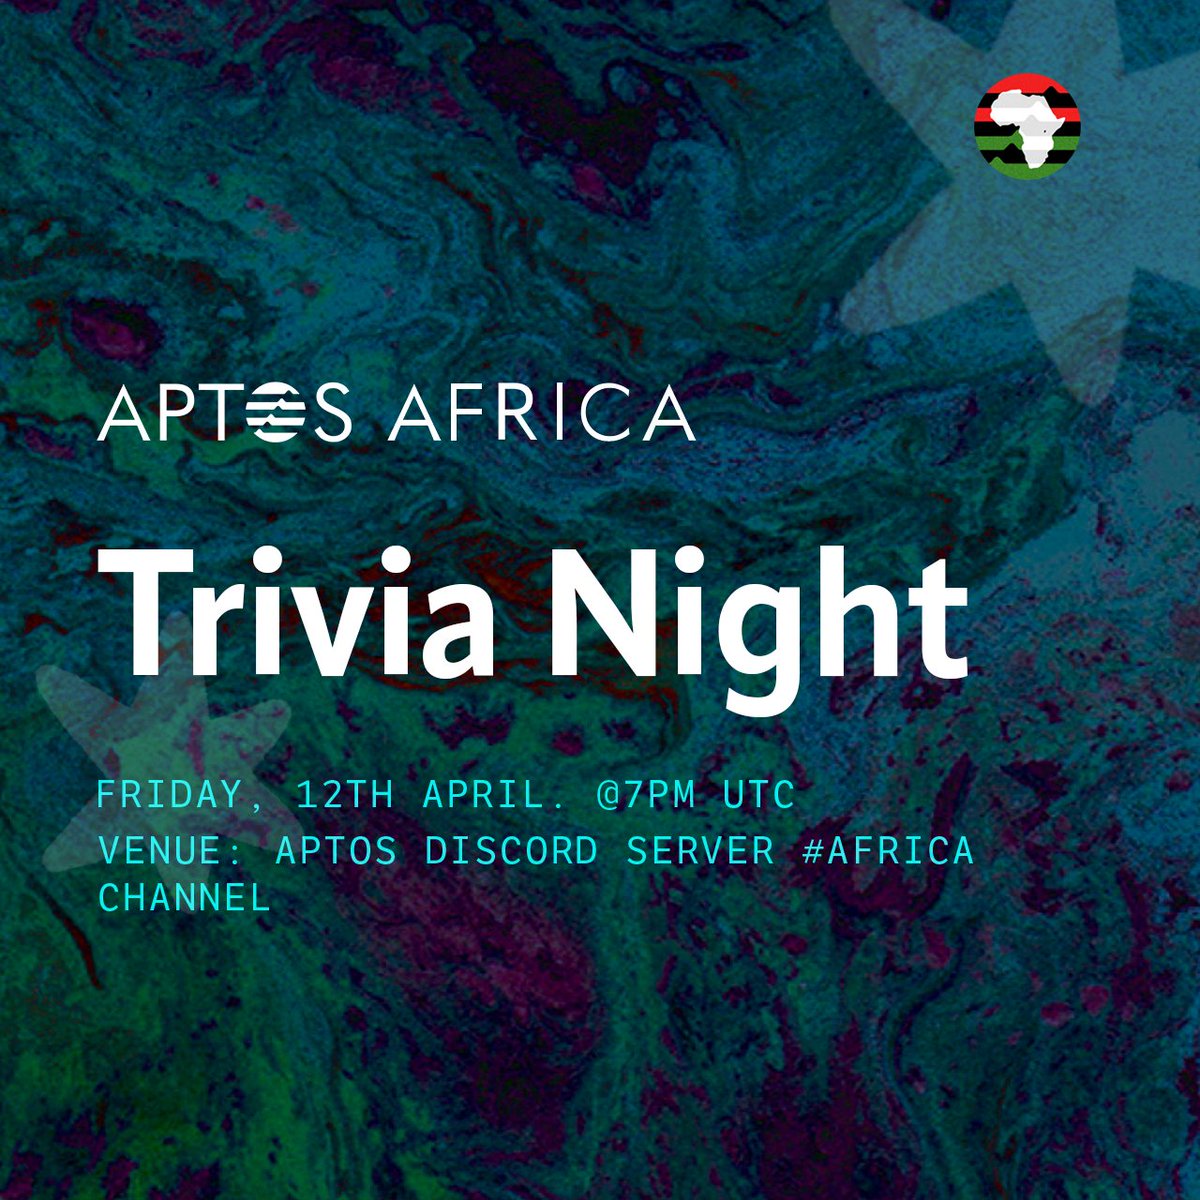 Get ready for APTOS Africa's Trivia Night! Dive into recent Aptos updates and happenings this Friday, 12th April, at 7 PM UTC. It's all happening on our Discord's #Africa channel—show off your Aptos acumen!